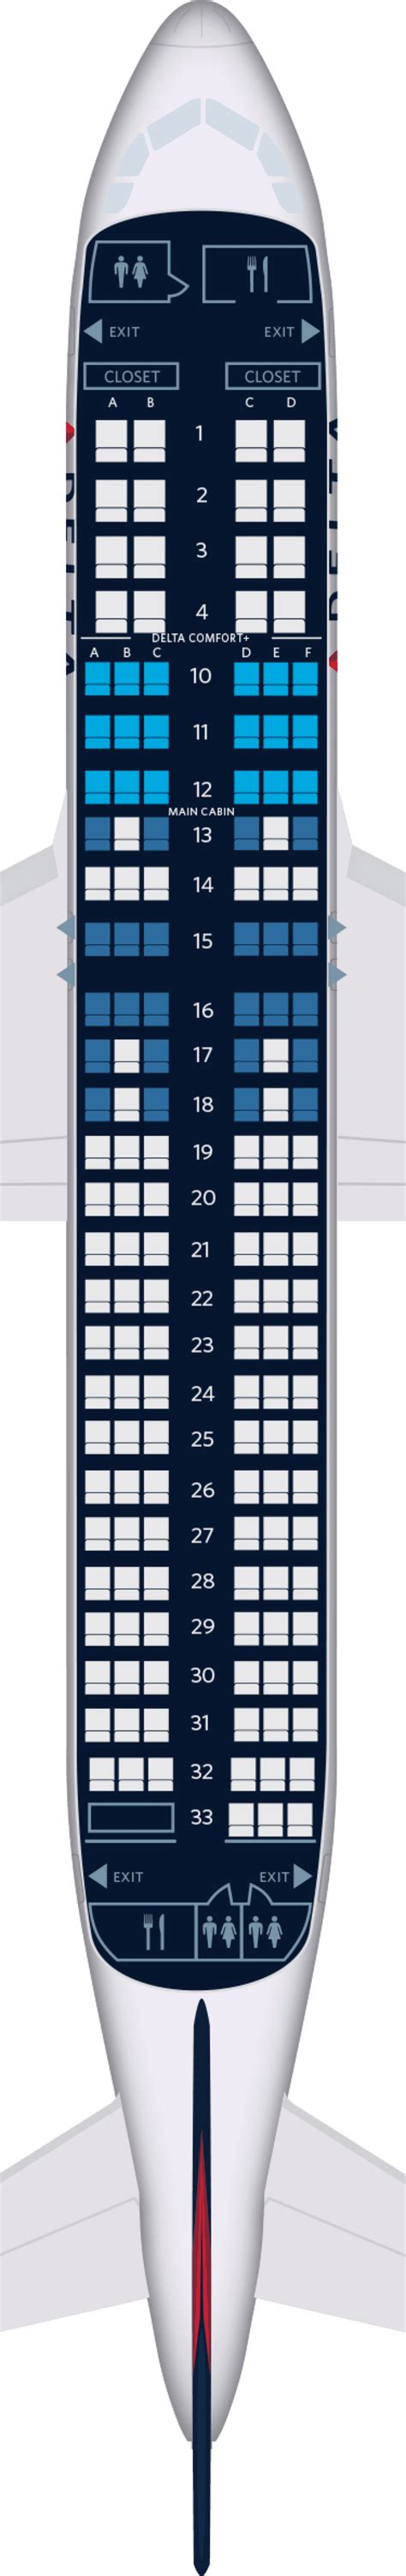 Economy. Seats 180. Pitch 28-29". Width 18". Recline 3". Swiss's economy class on the Airbus A320-200 V.1 offers a practical solution for travelers. With 180 seats, it's a blend of cost-effectiveness and essential amenities. The in-flight entertainment keeps passengers engaged, and the dedicated crew ensures a satisfactory flight experience.. 